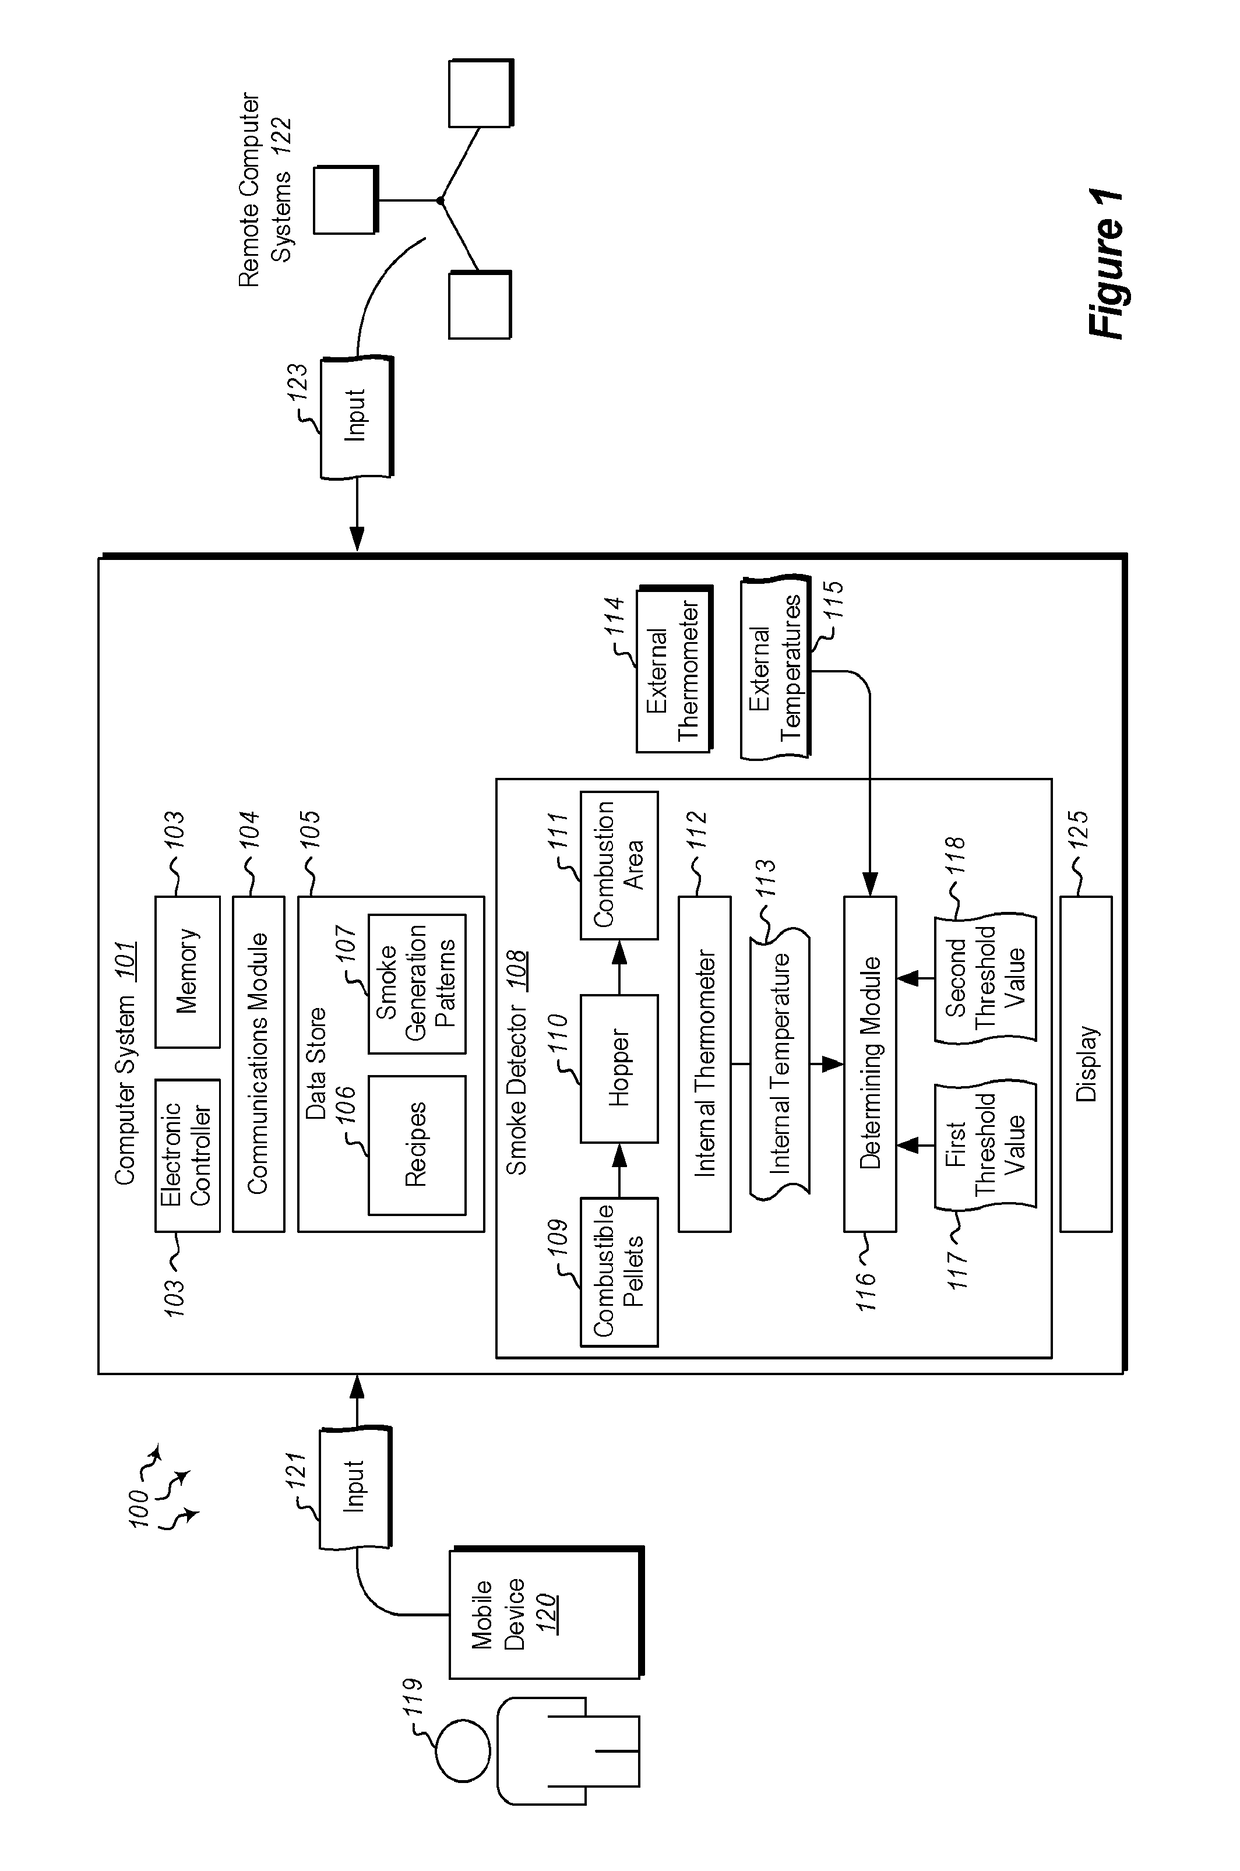 Smoke generation cooking system and methods